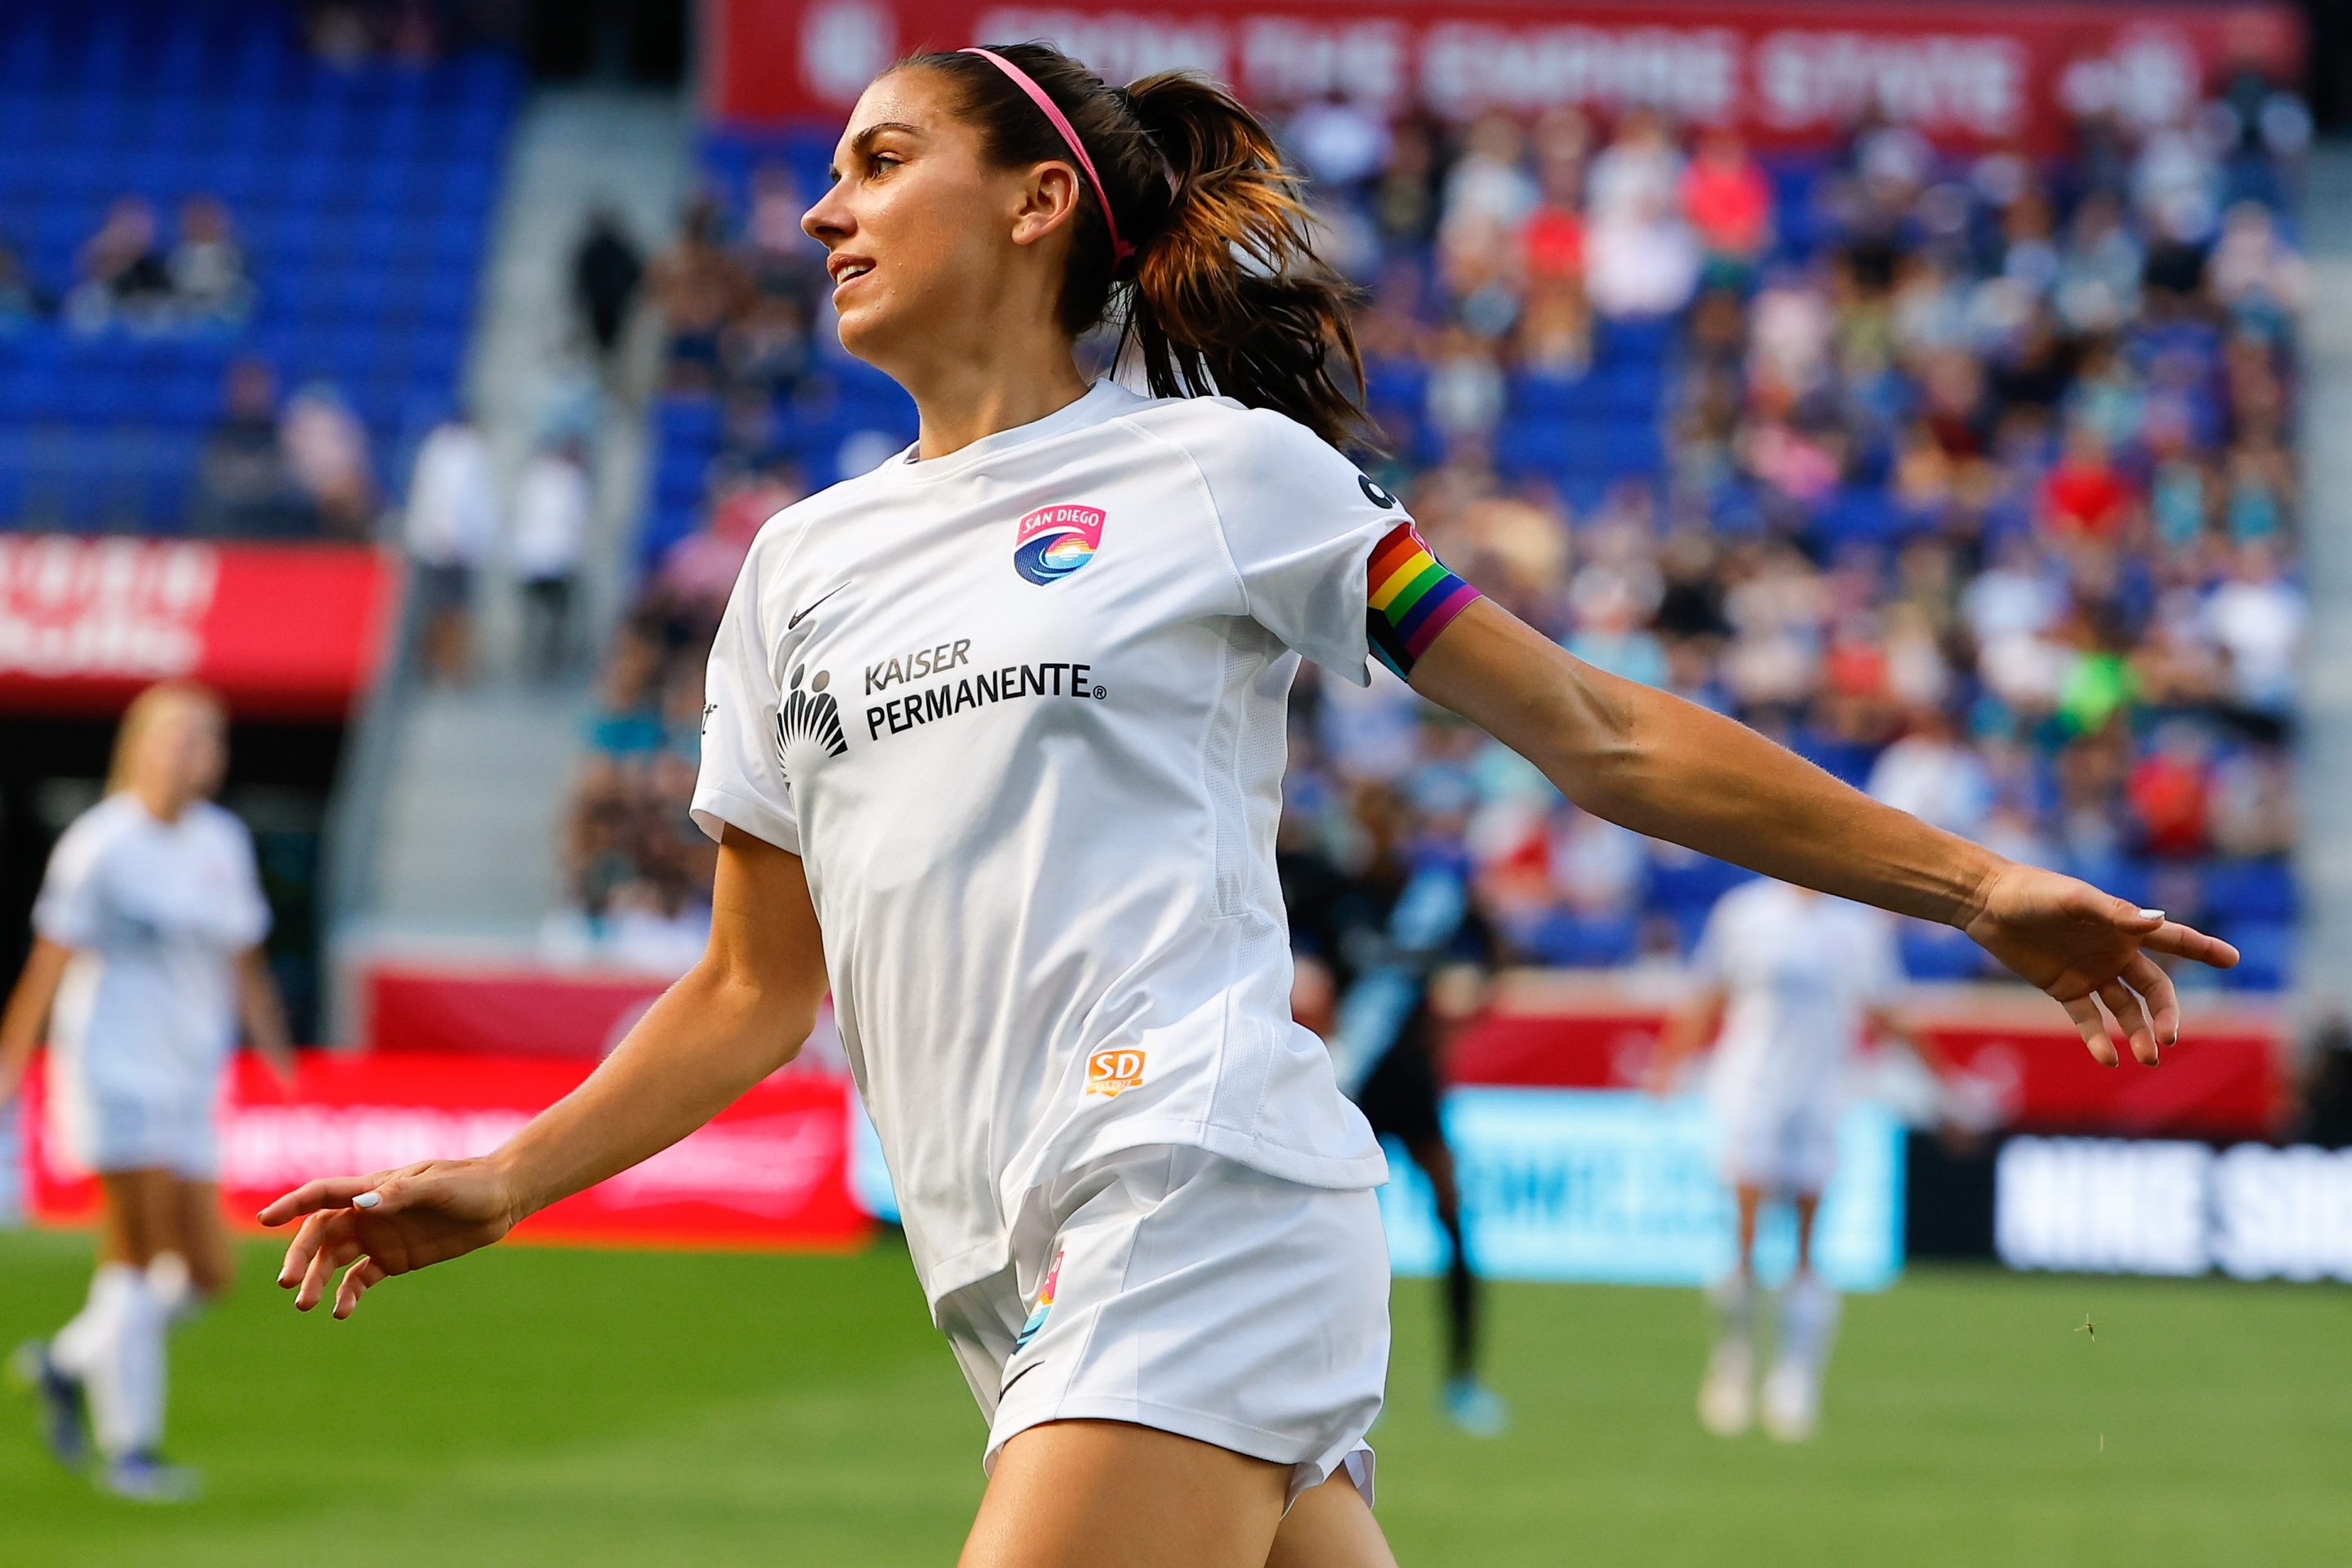 San Diego Wave FC forward Alex Morgan (13) celebrates after scoring during the first half of the NWSL soccer game between NJ/NY Gotham FC and San Diego Wave FC on June 19, 2022 at Red Bull Arena in HArrison, NJ. Her arms are wide open, like an airplane, and she's smiling.